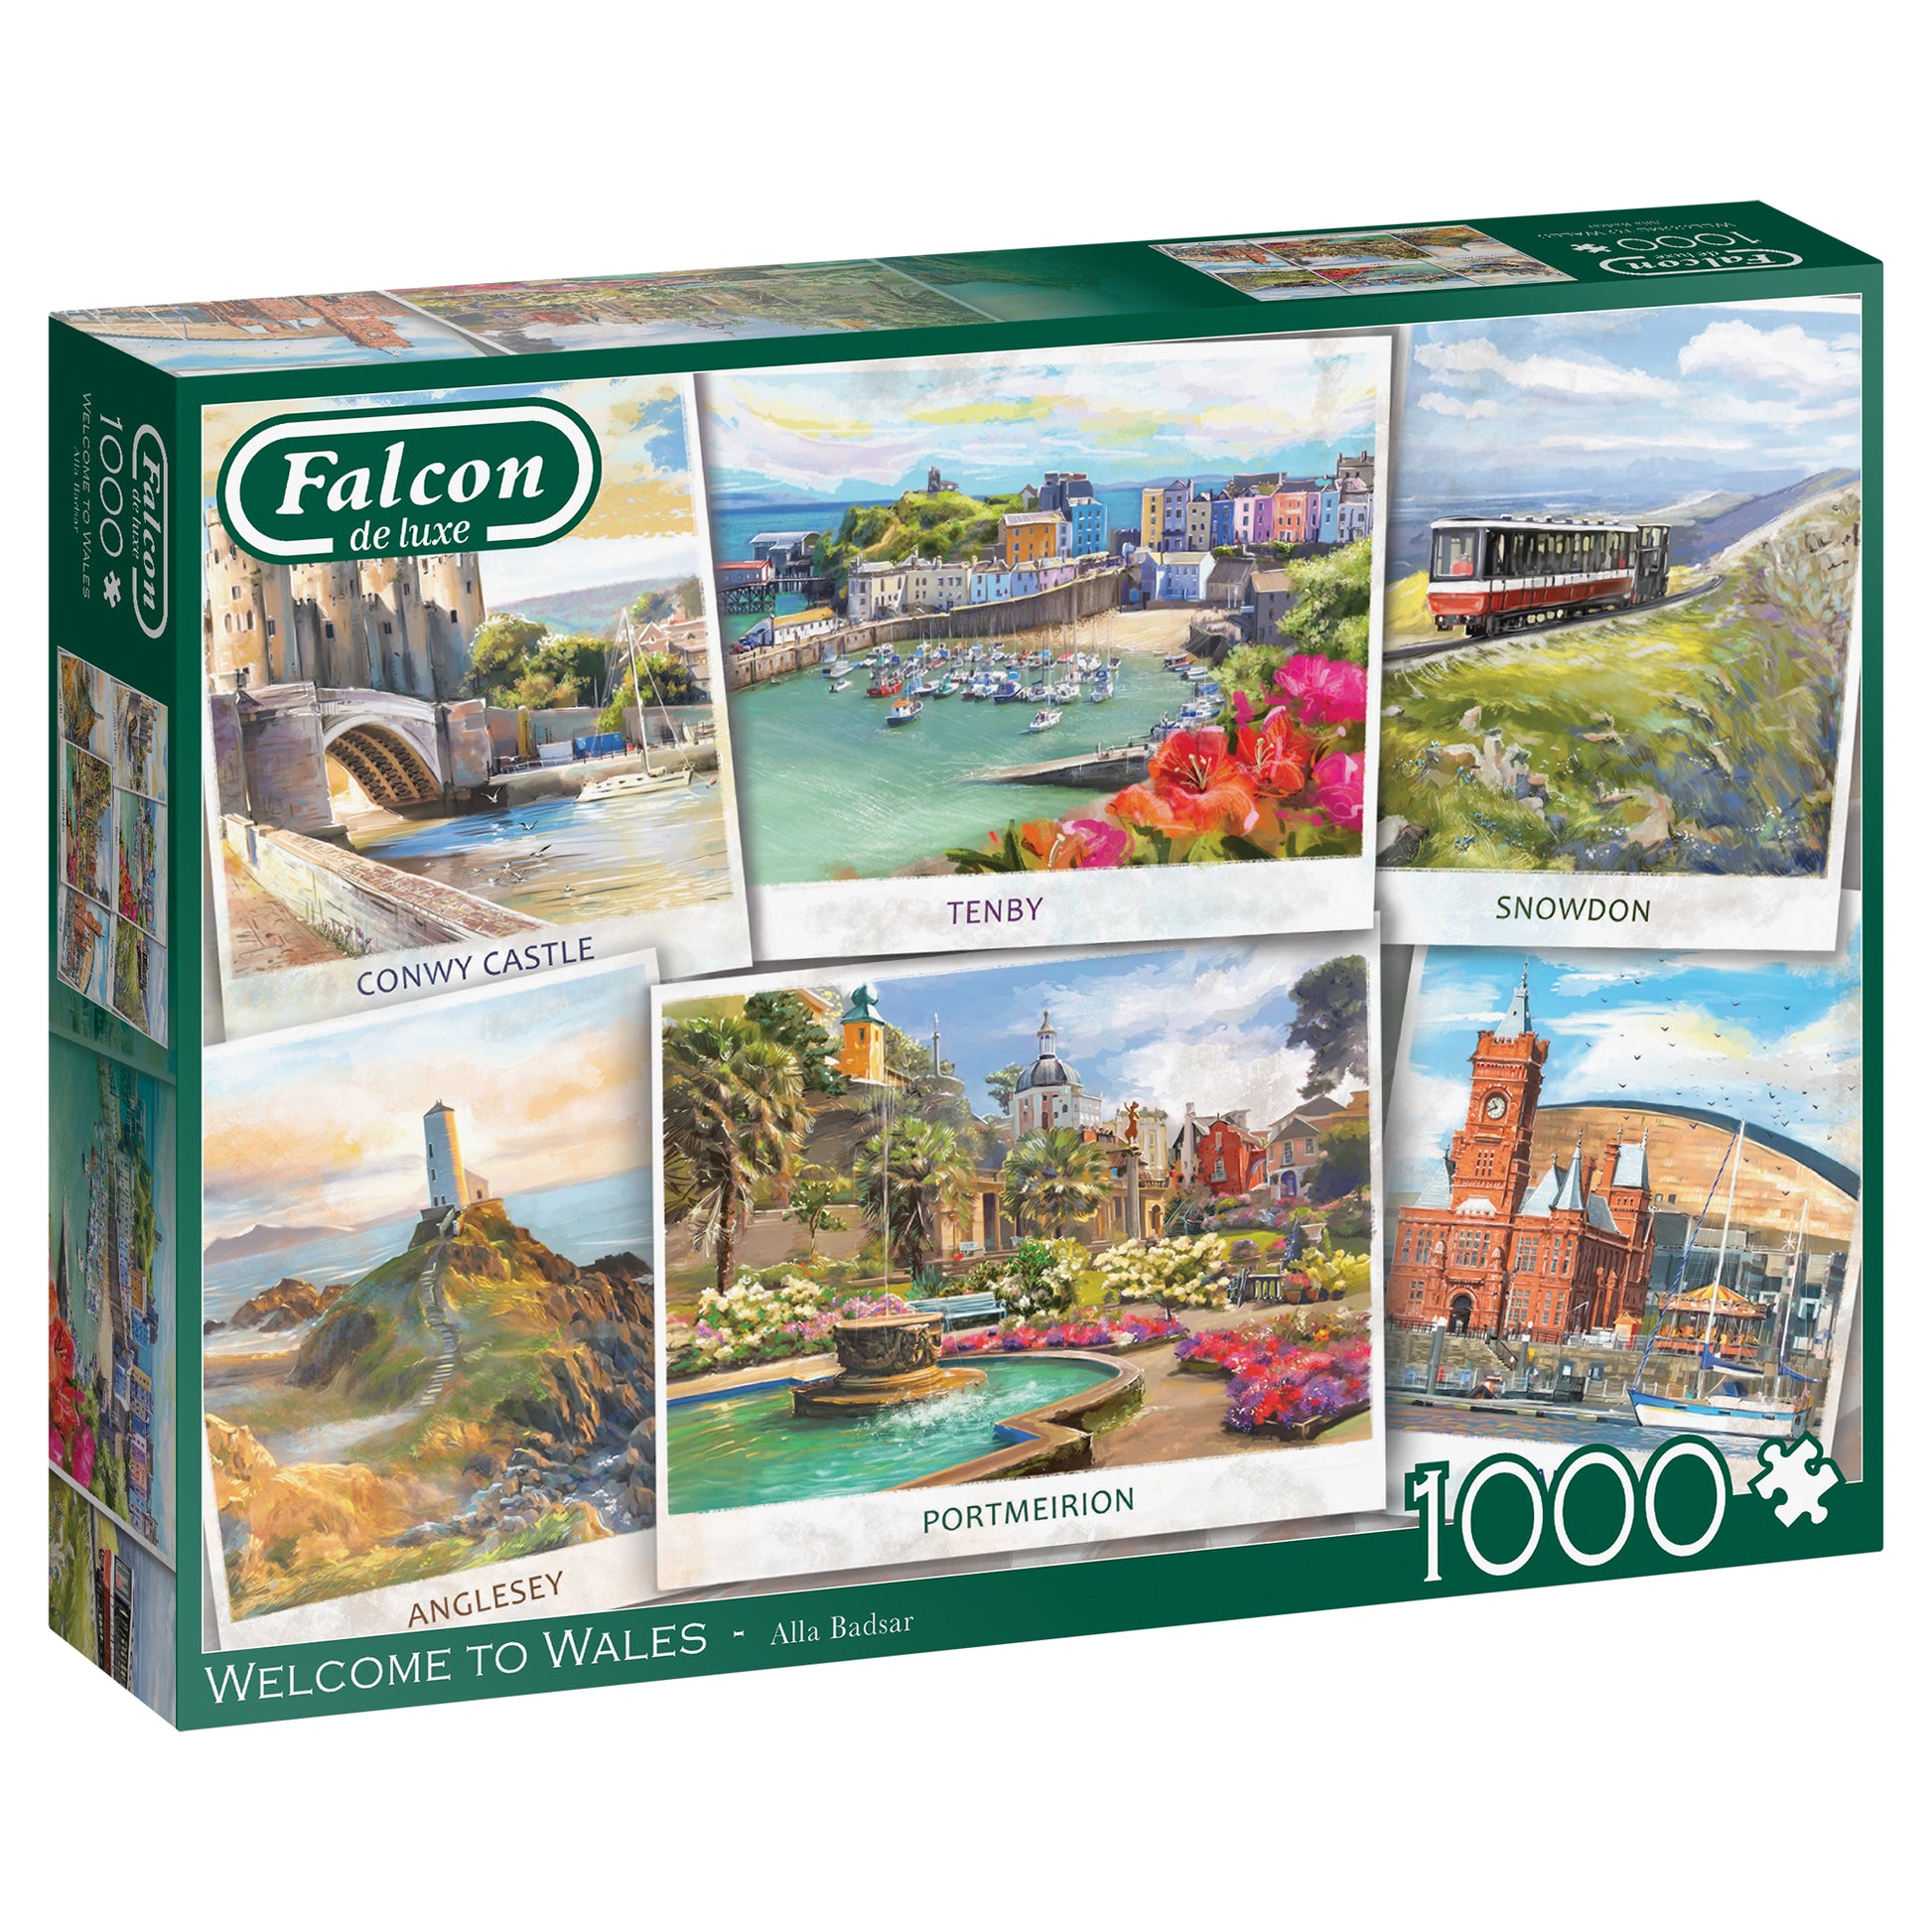 Falcon - Welcome to Wales (1000 pieces) - product image - Jumboplay.com